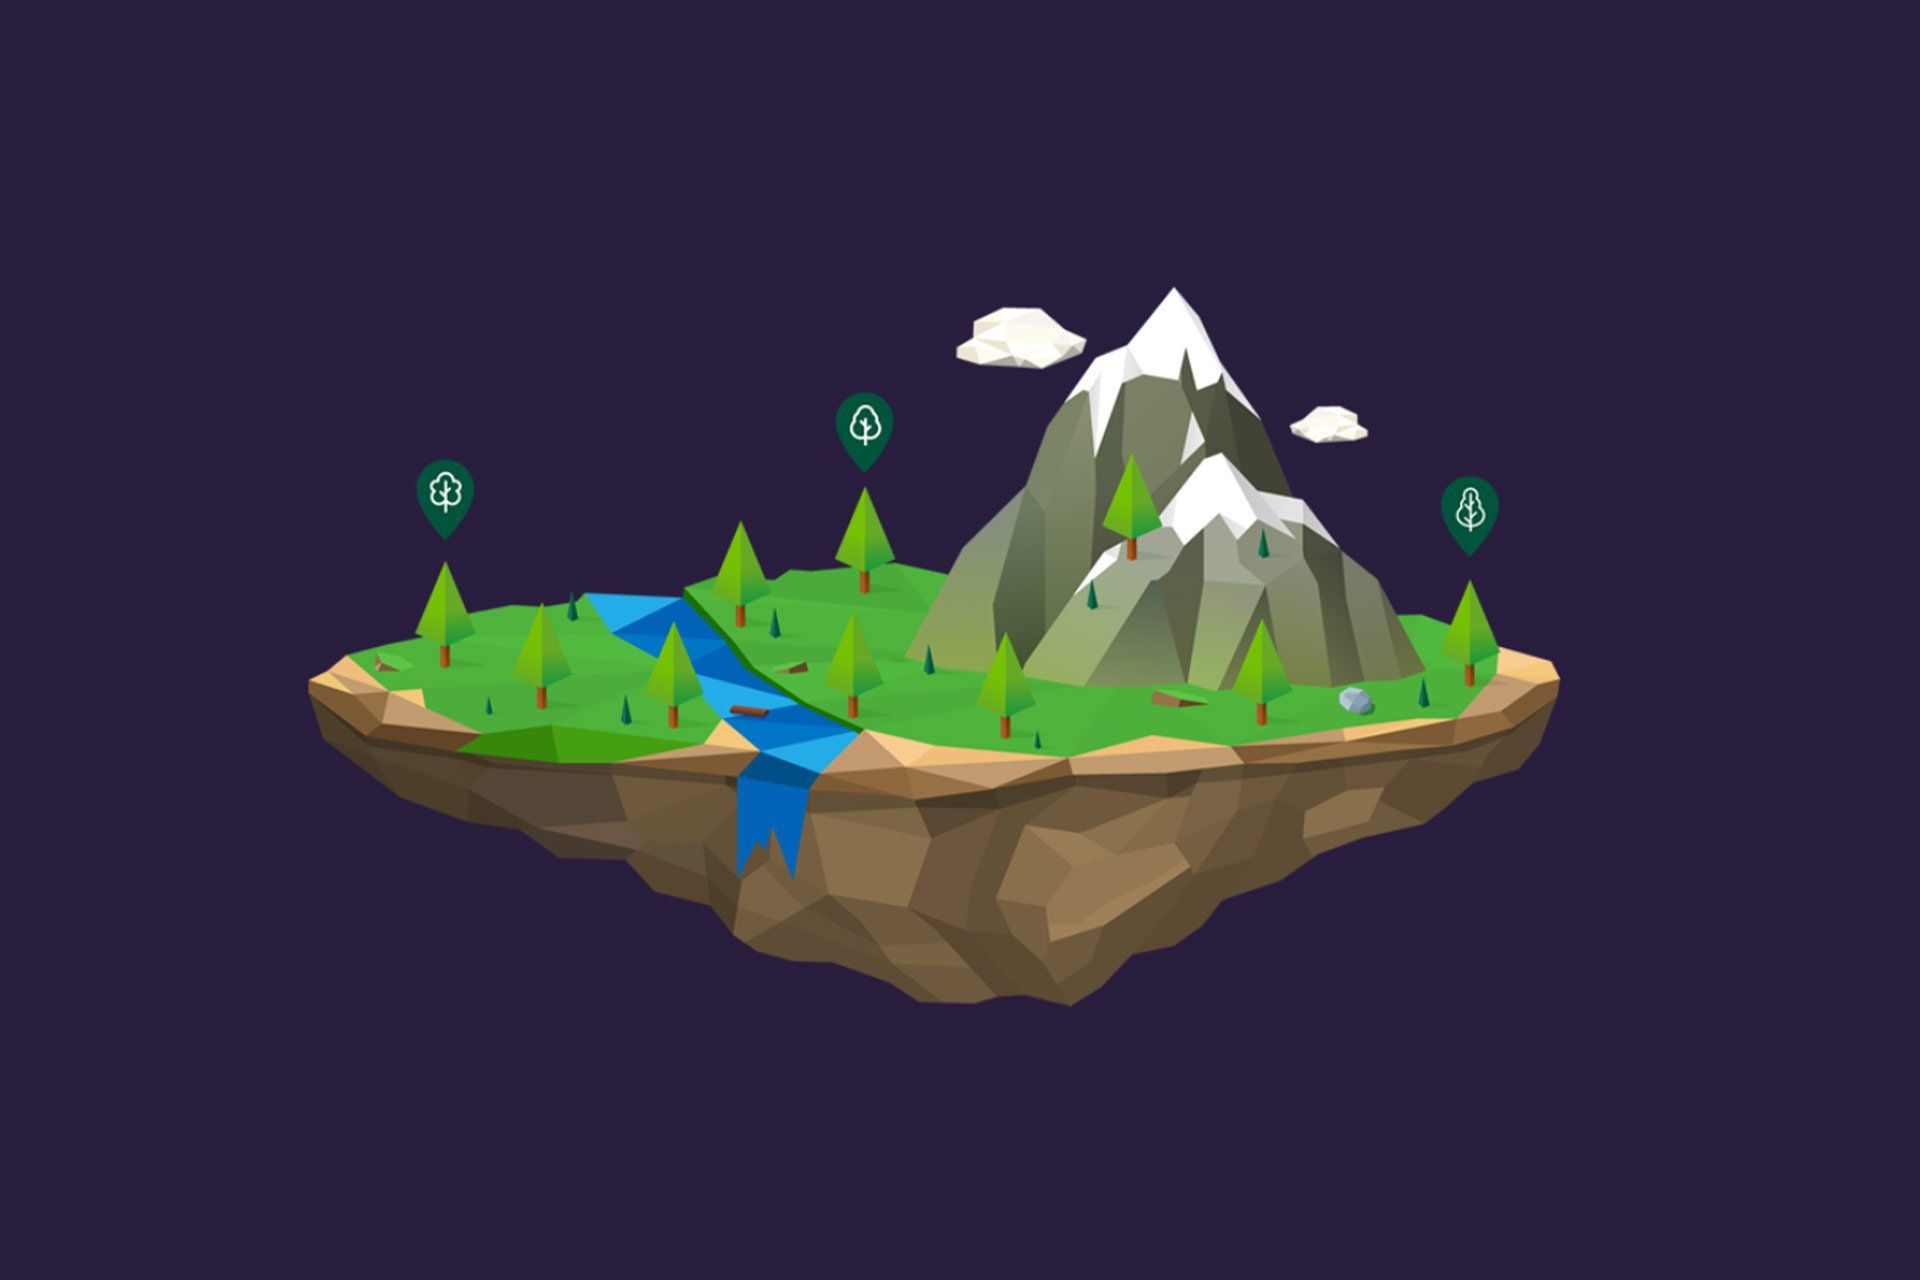 Graphic of a segment of the earth, with trees, mountains and a river on it. Several trees feature a logo pin above them.